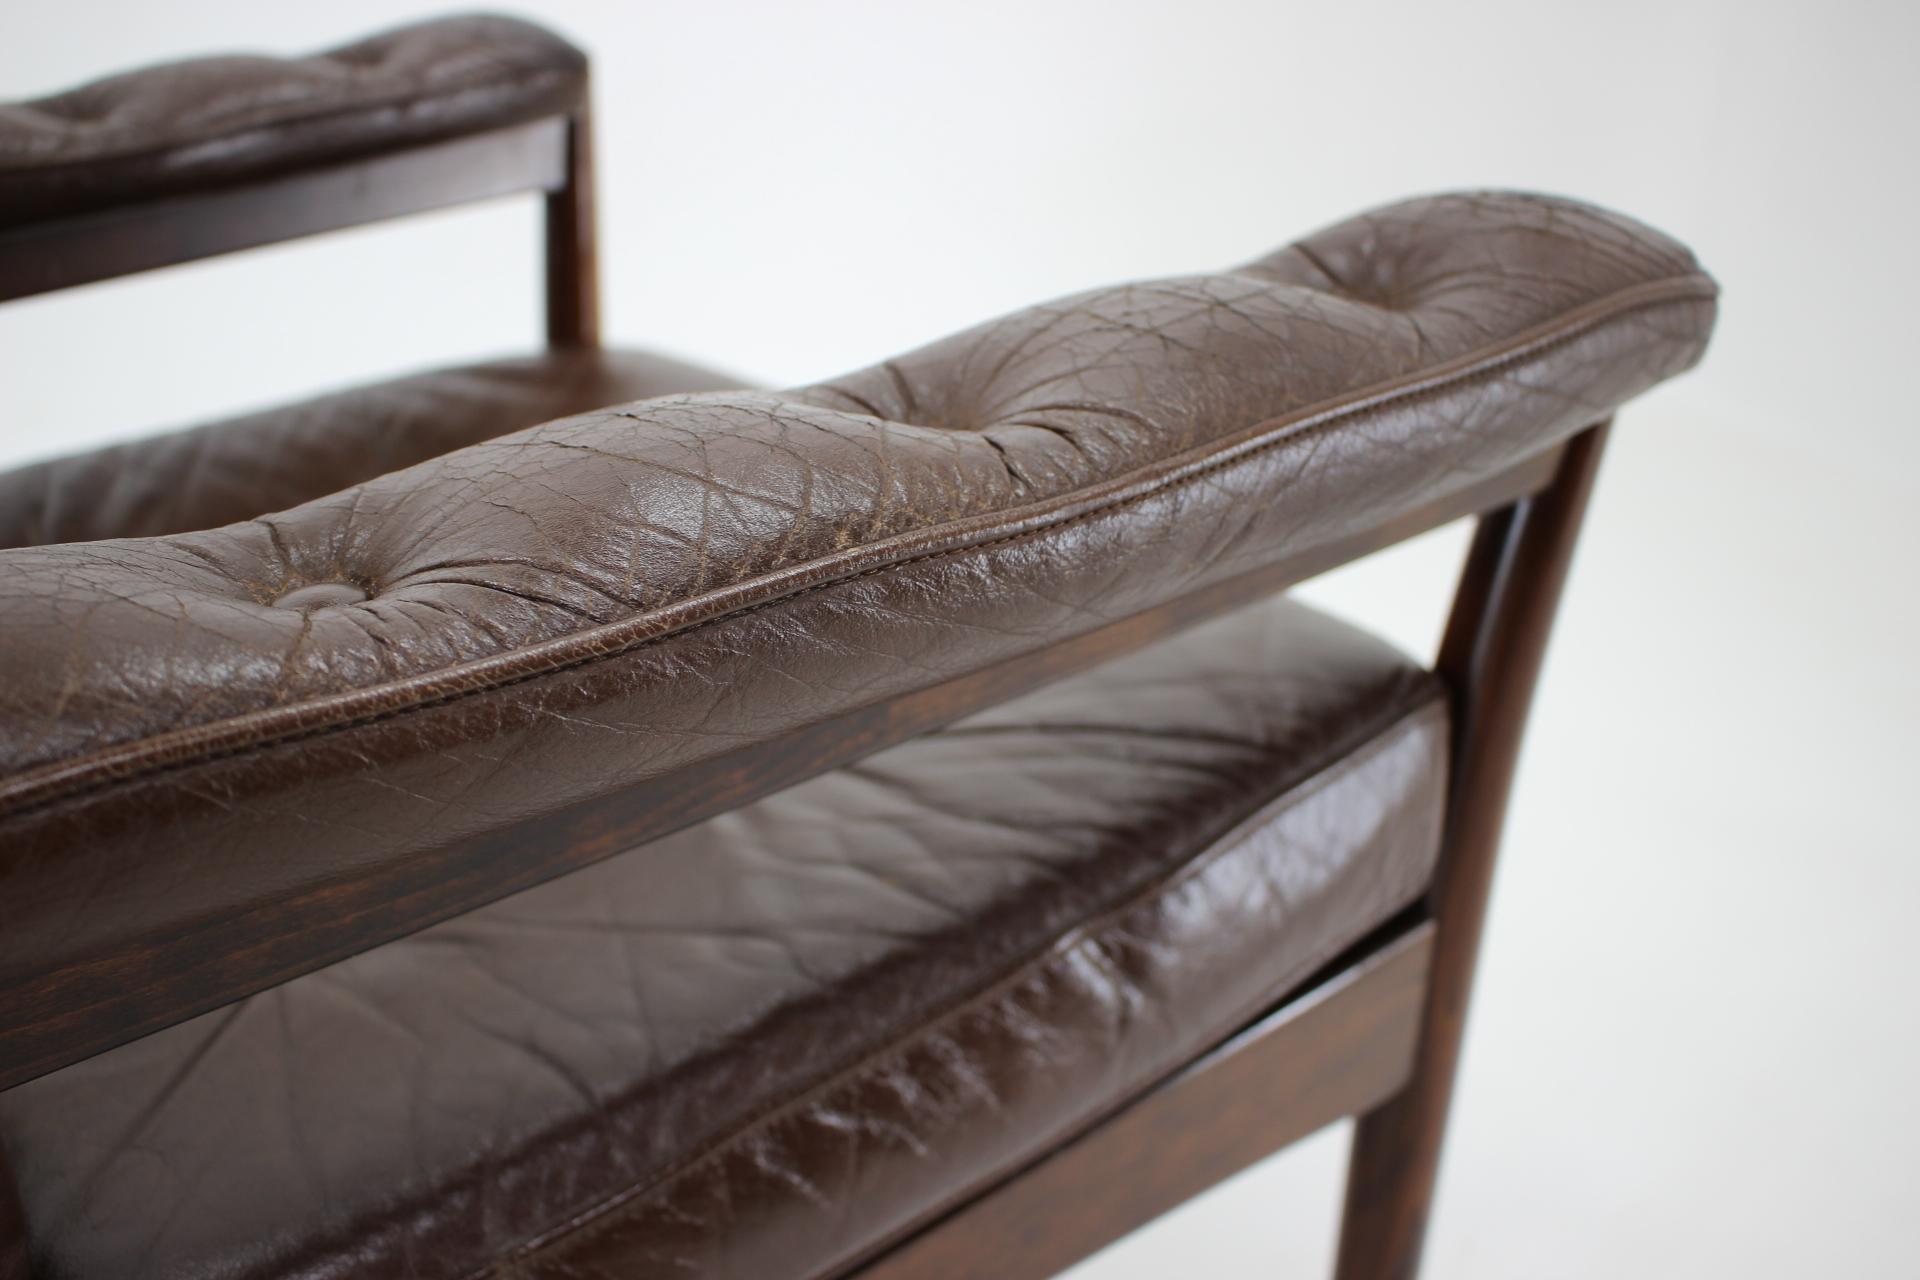 Late 20th Century Midcentury Scandinavian Leather Armchair, 1960 / Sweden / G-Mobler For Sale